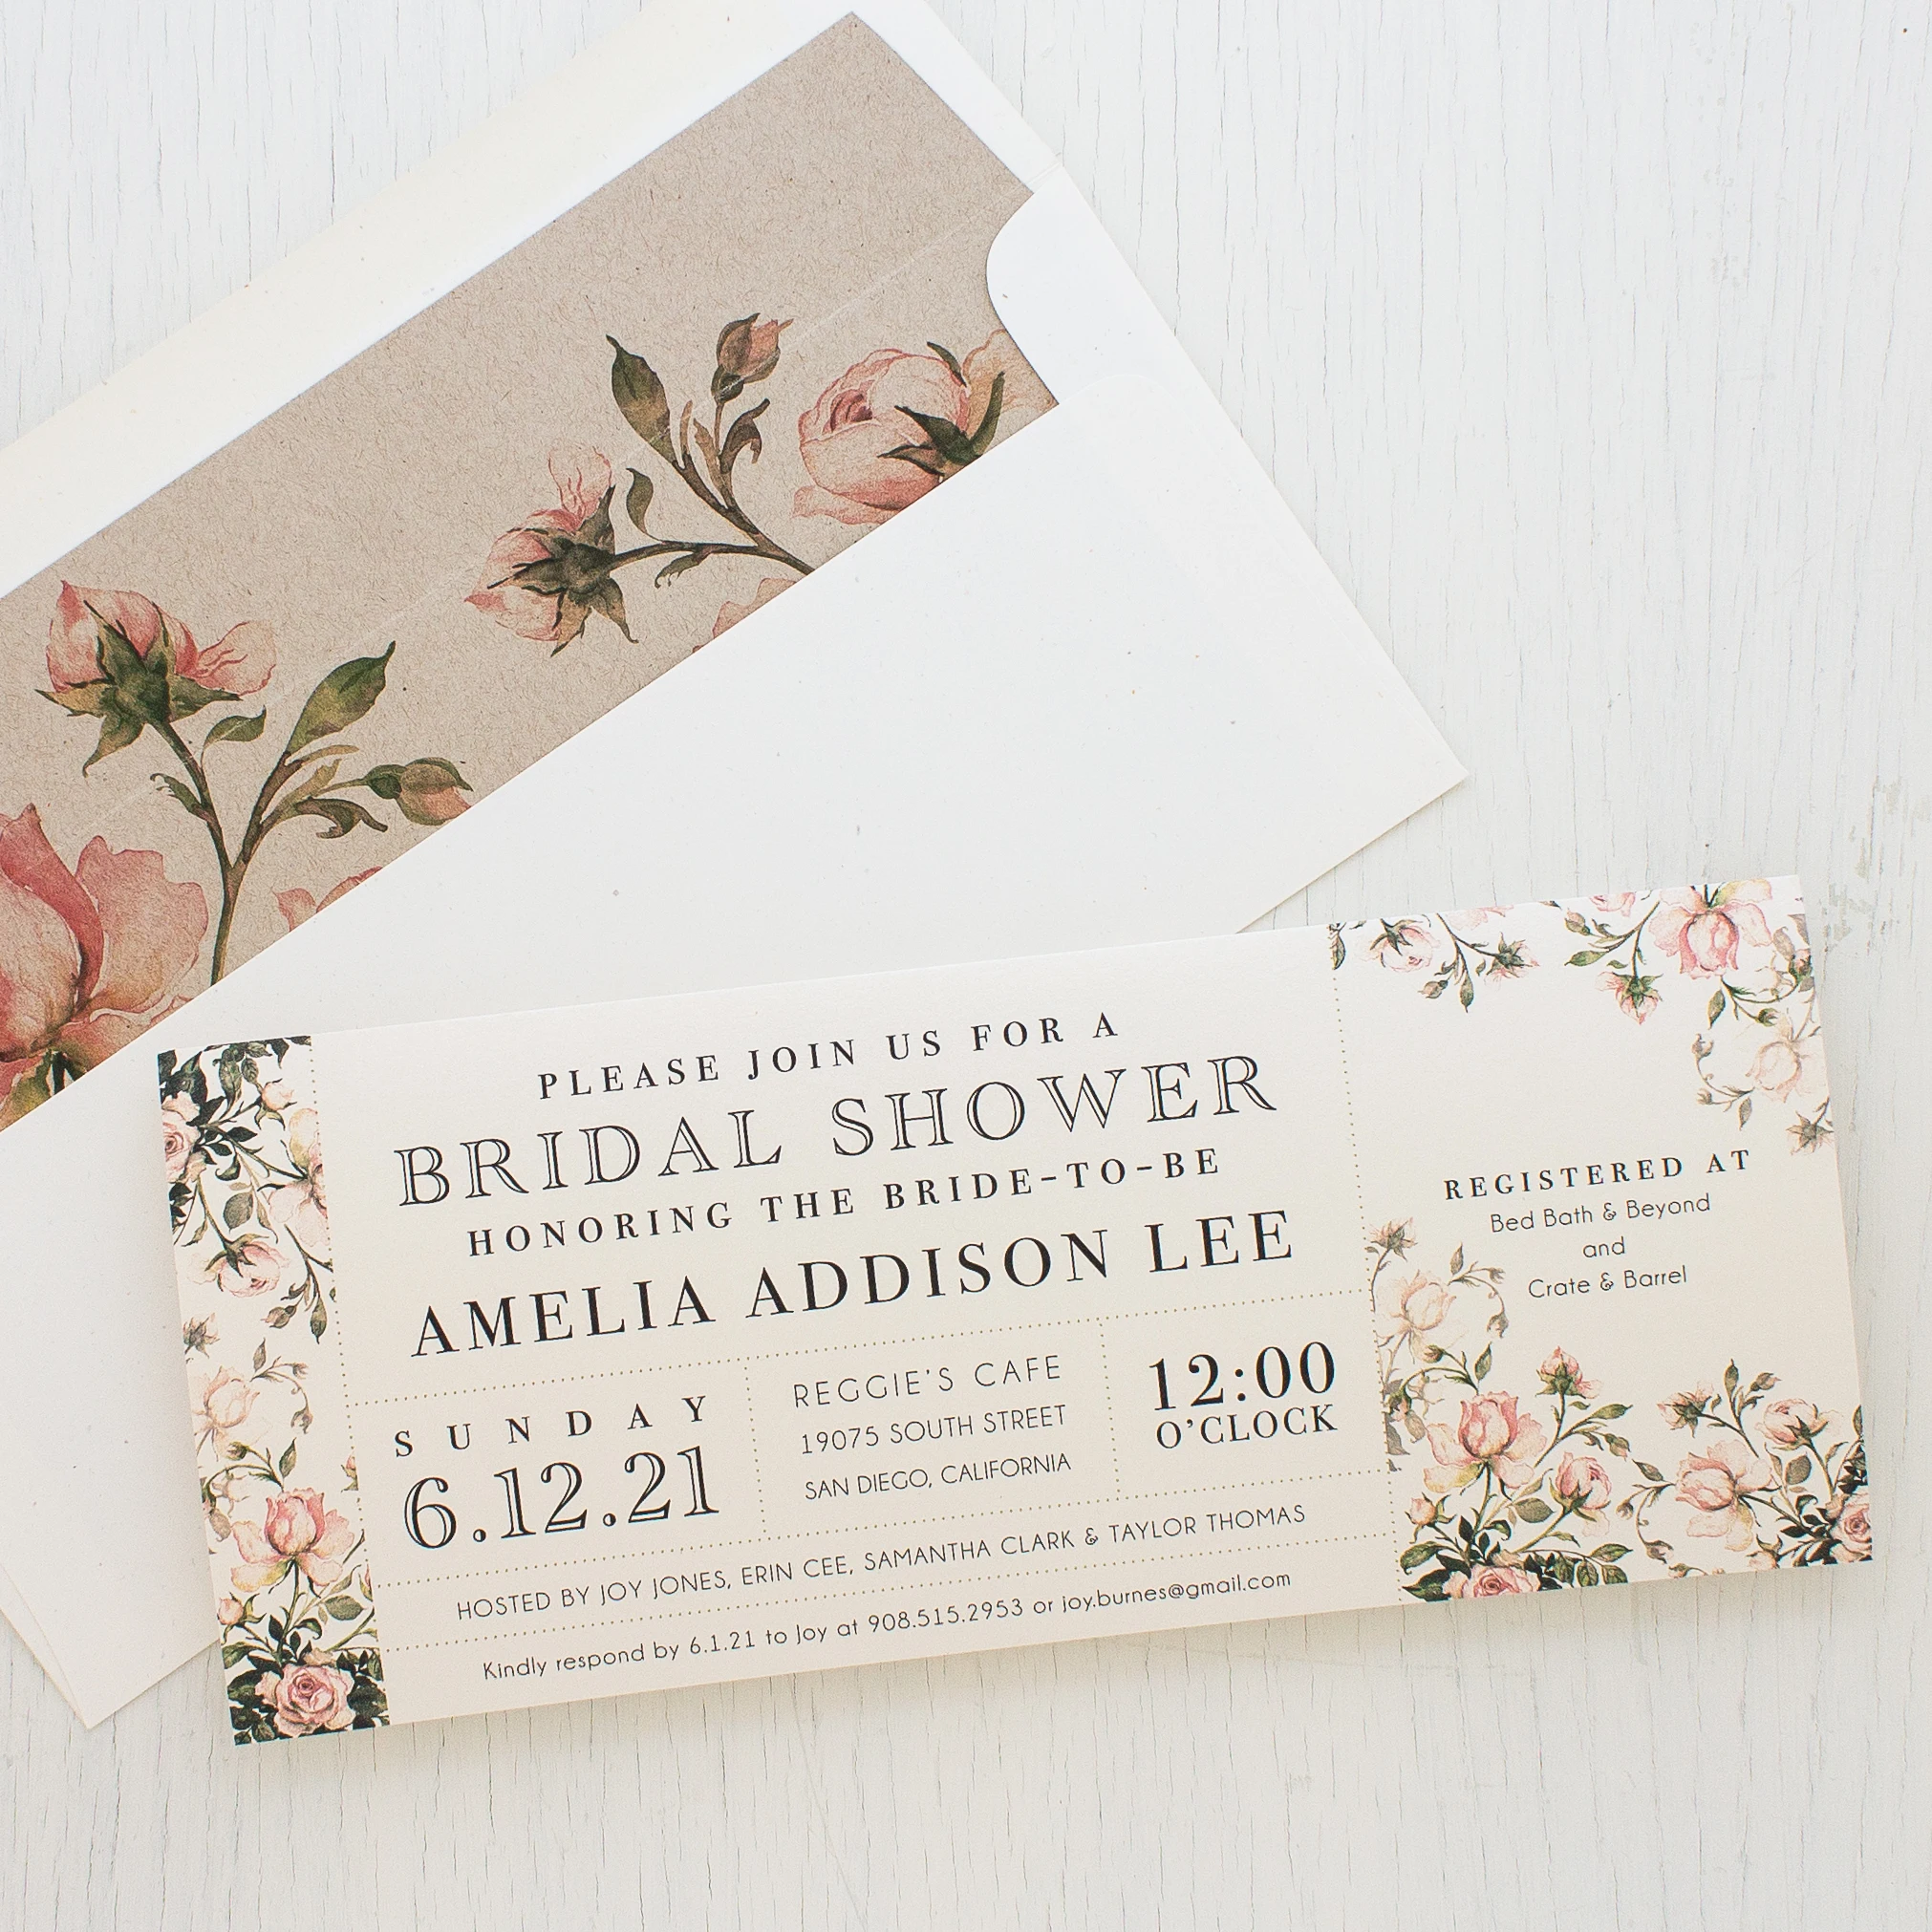 Cheap Floral And Garden Theme Bridal Shower Invitations With Envelope - Buy Bridal Shower